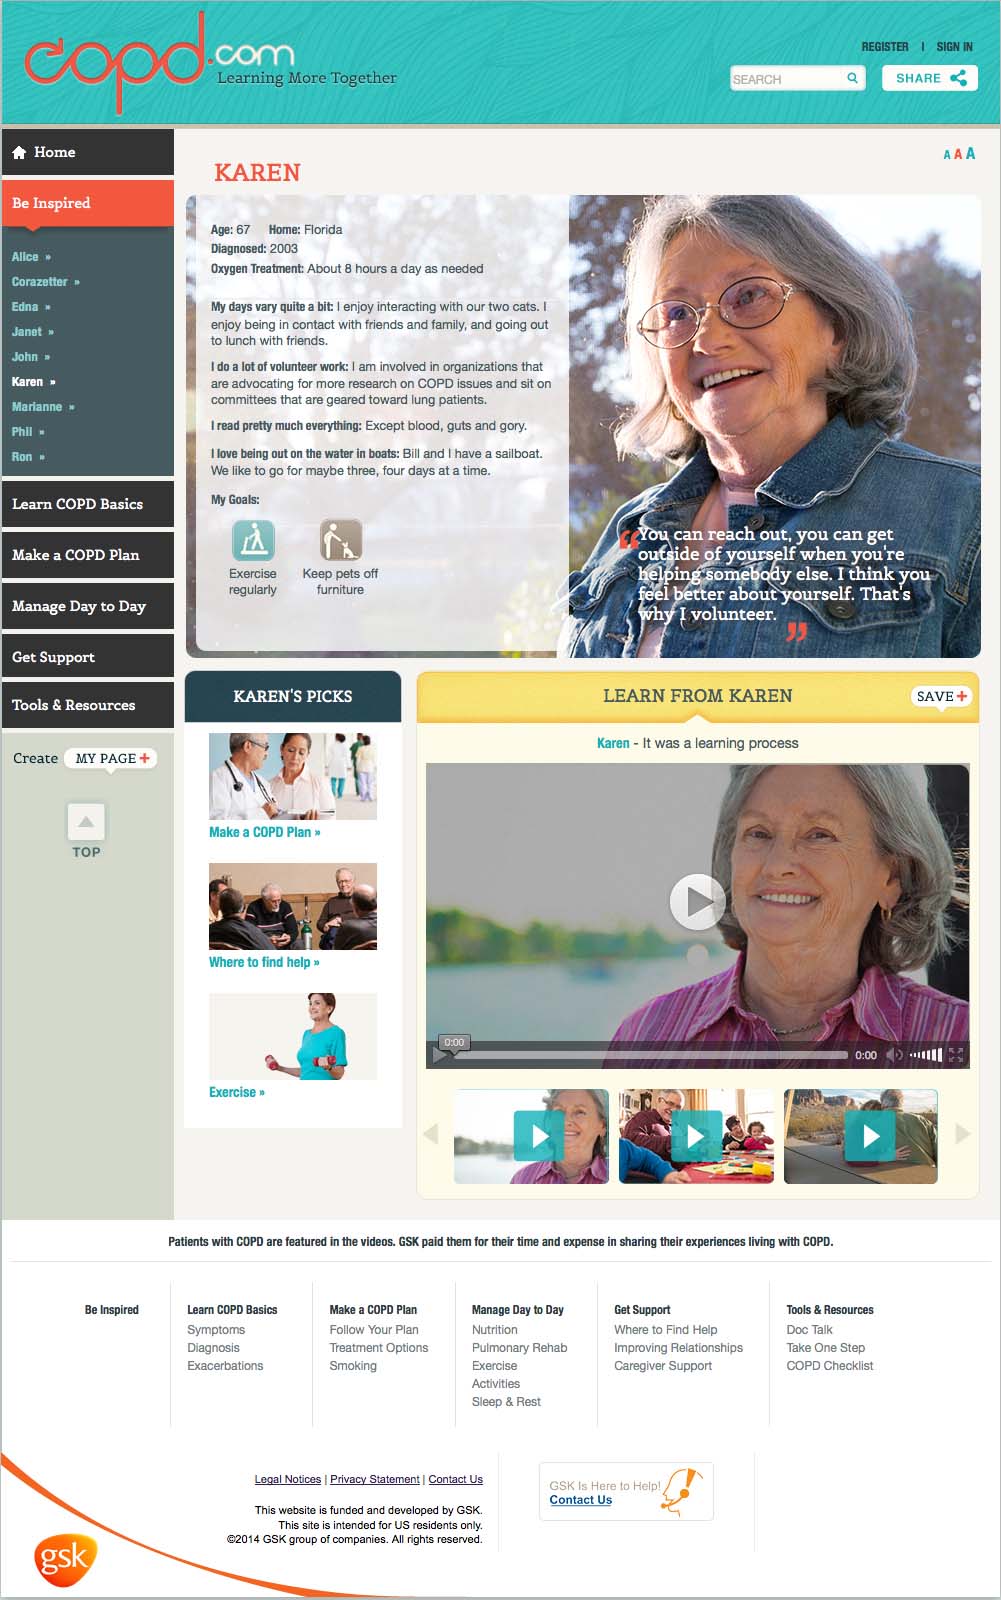 GSK’s COPD.com Relaunch Promotes Understanding and Dialogue about COPD